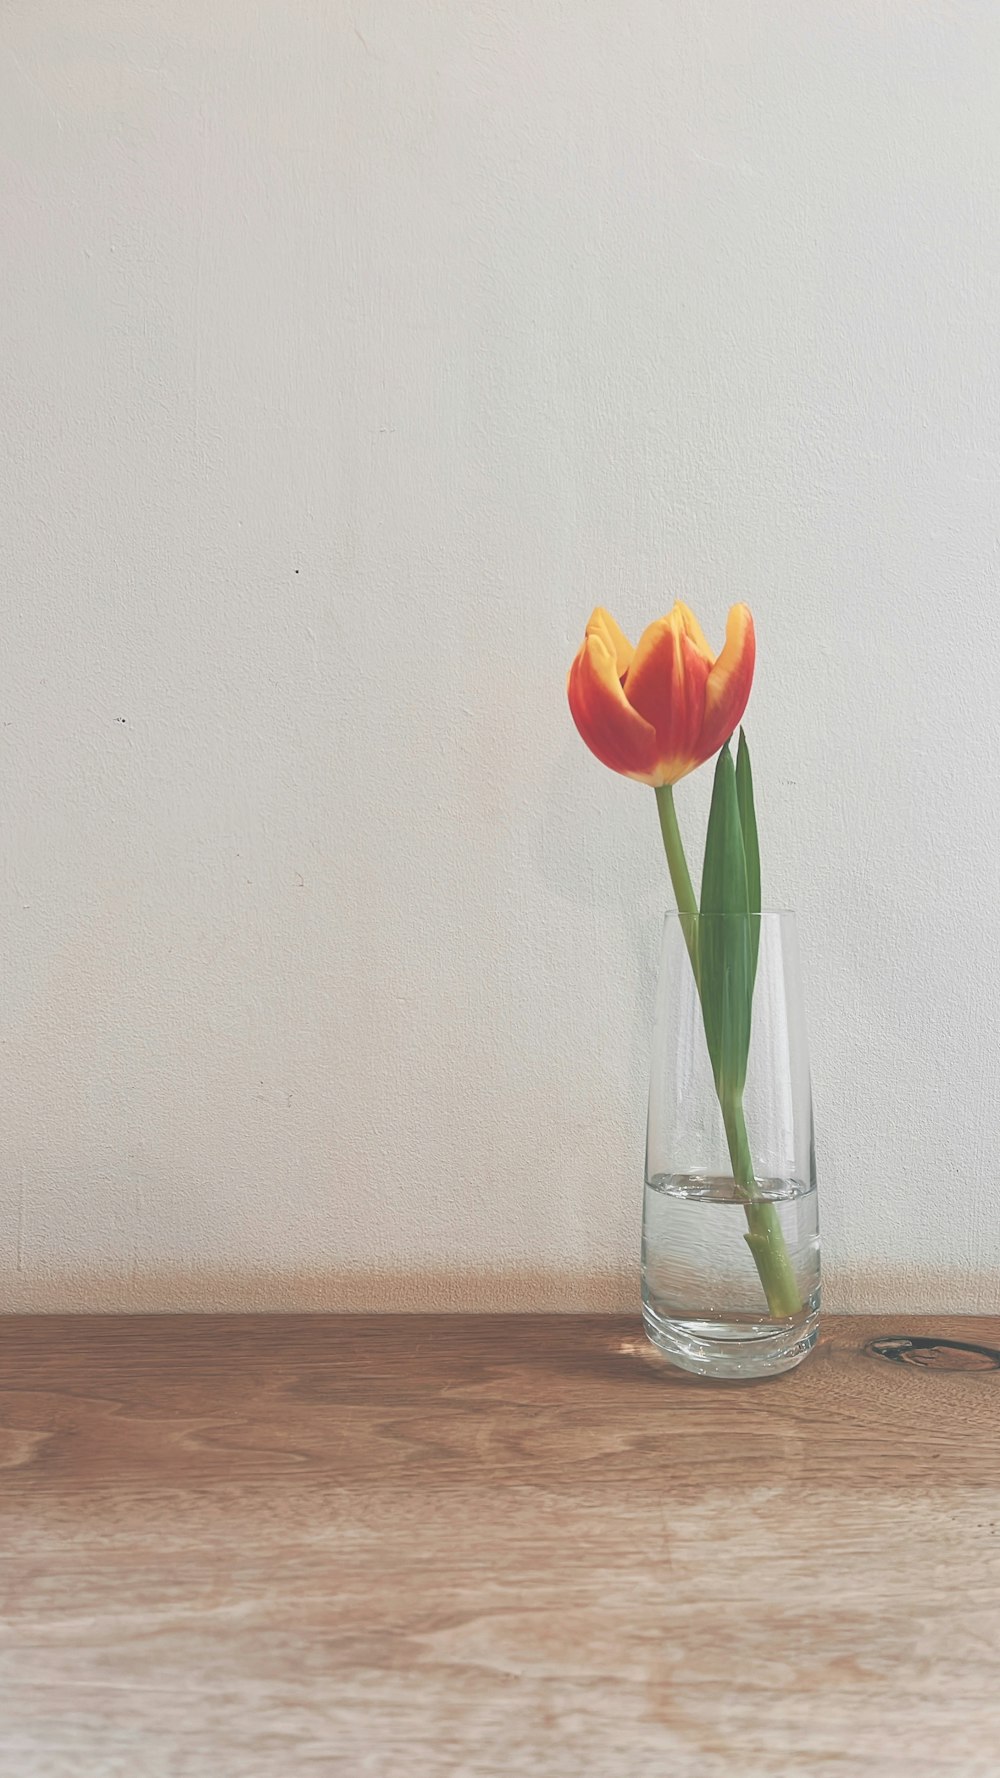 a single tulip in a glass vase on a table